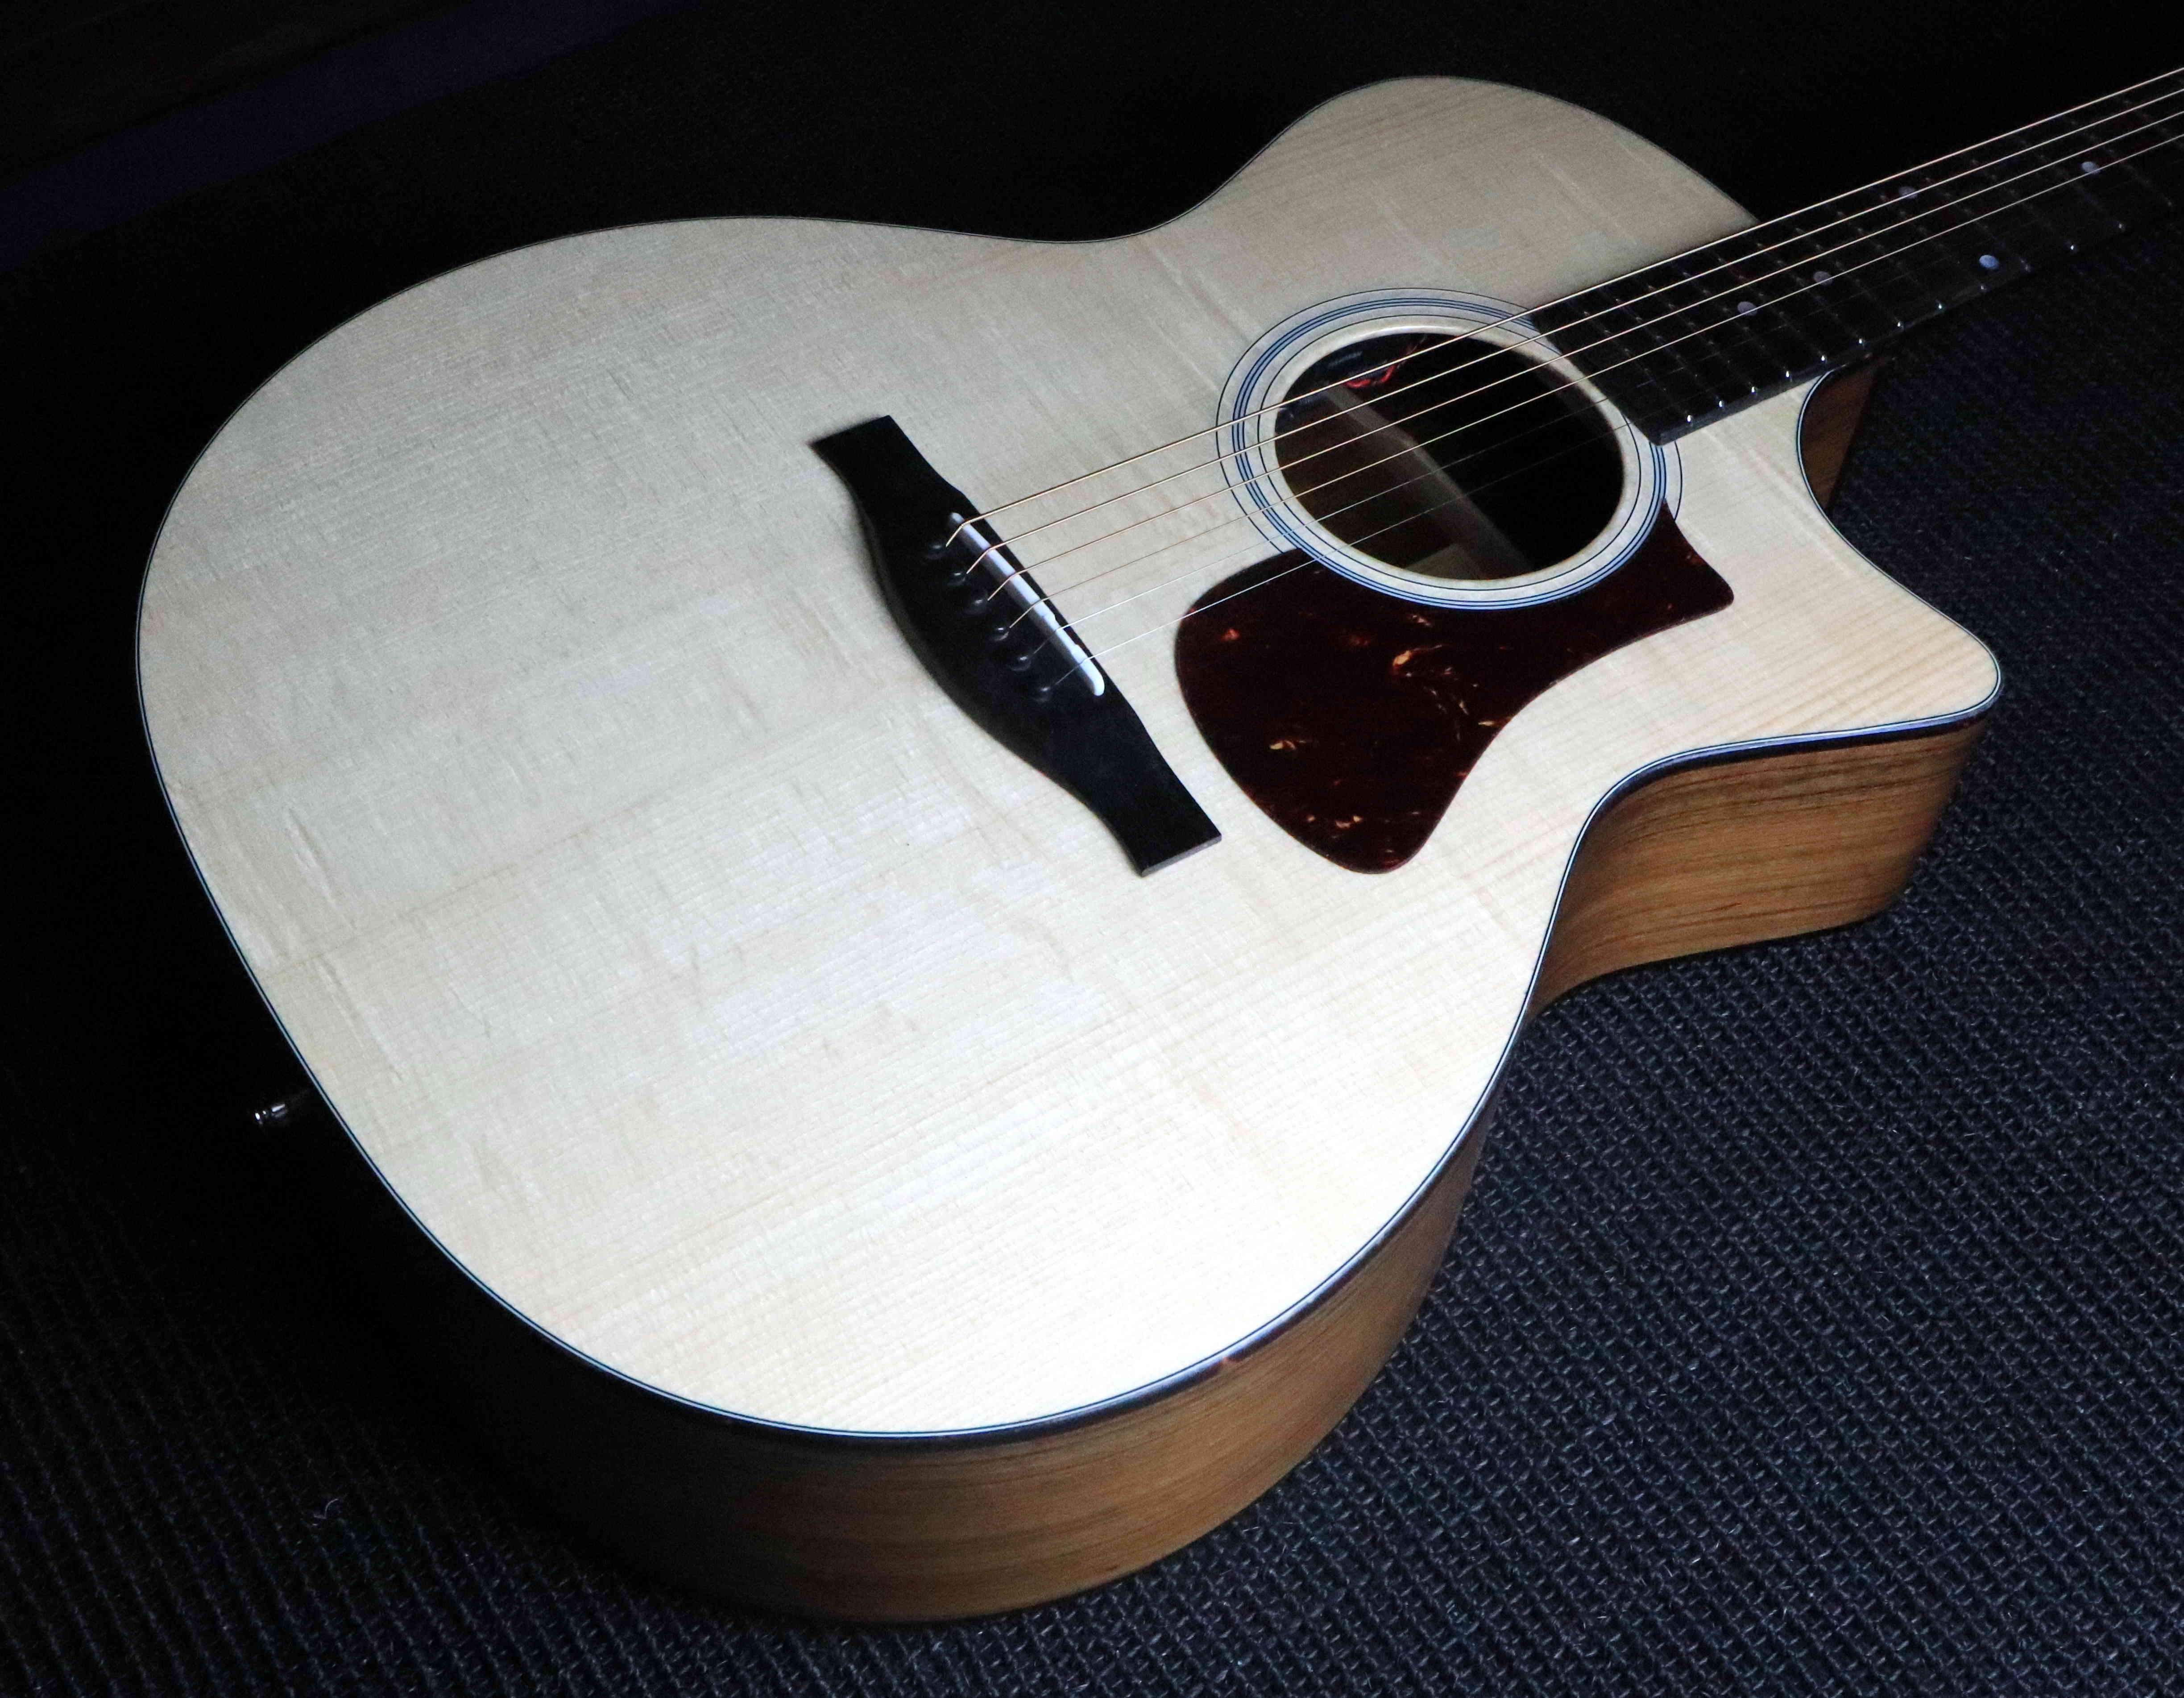 Eastman AC222CE OV Left Handed, Electro Acoustic Guitar for sale at Richards Guitars.